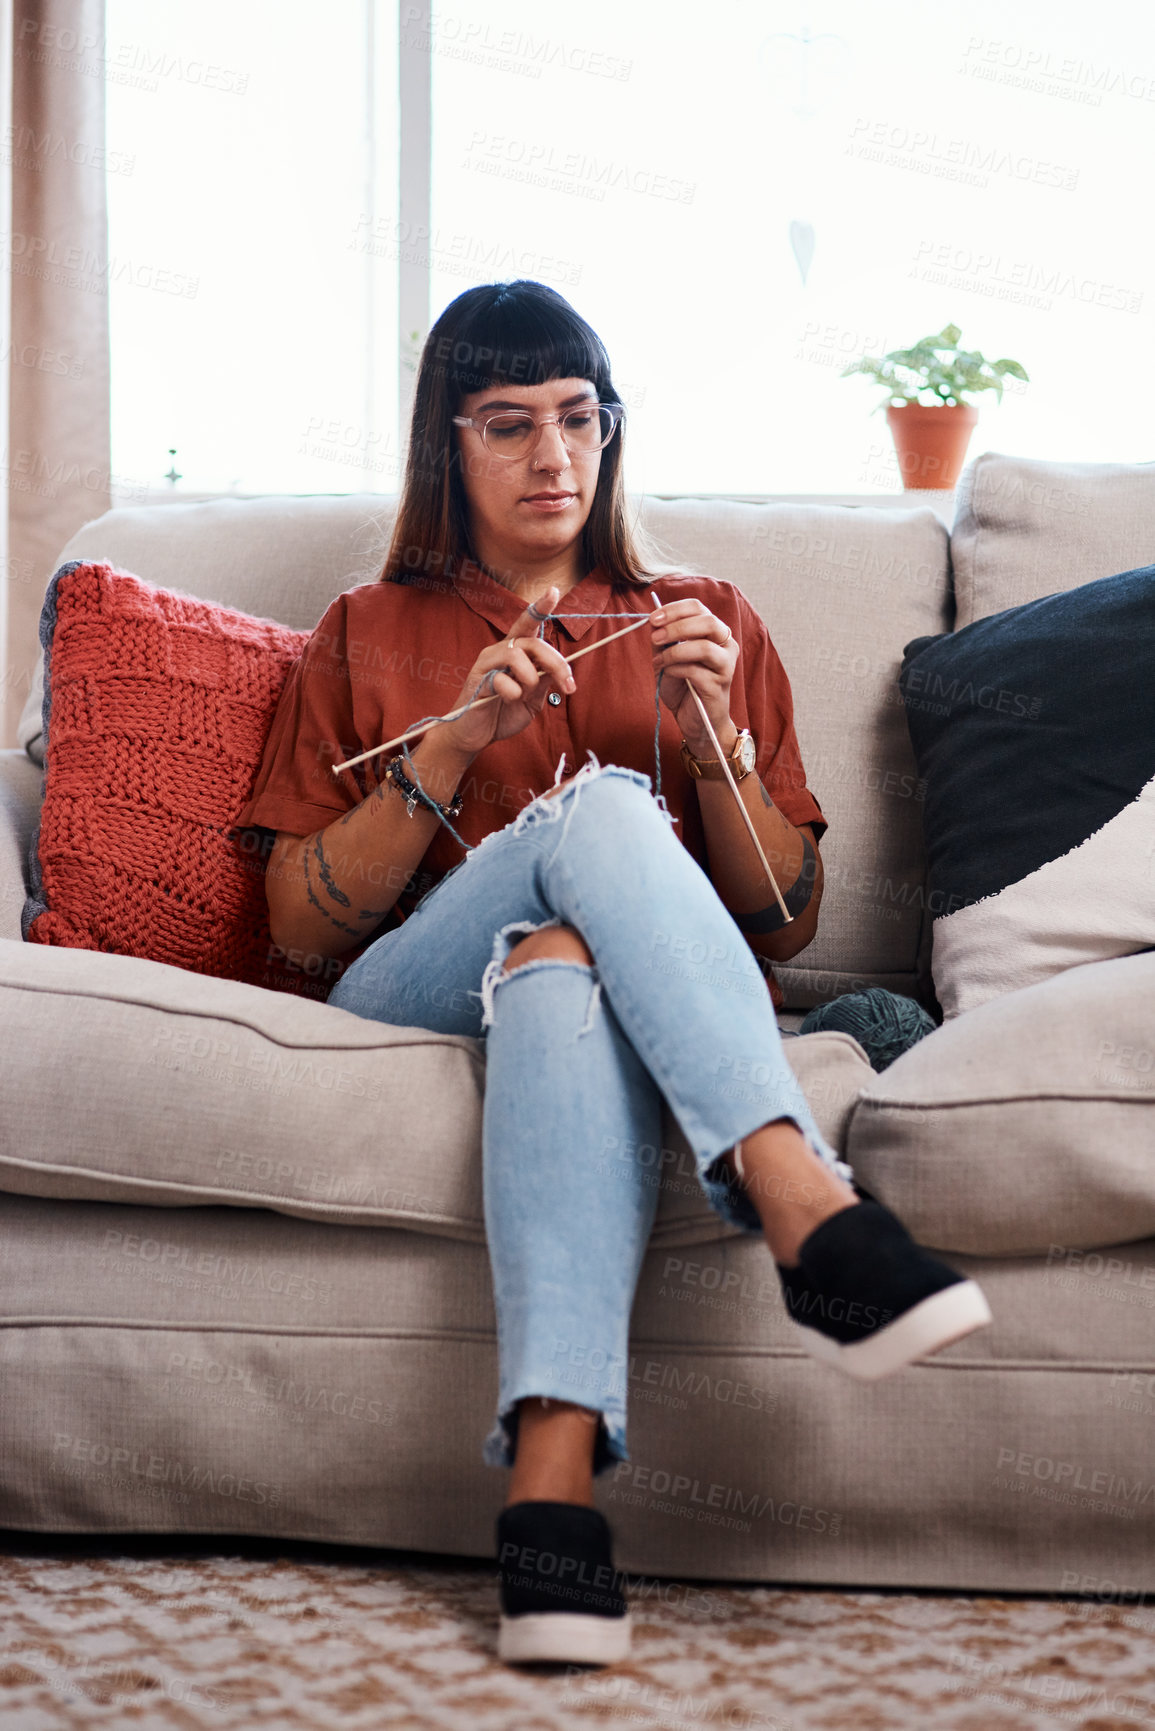 Buy stock photo Full length shot of a young woman knitting while relaxing at home